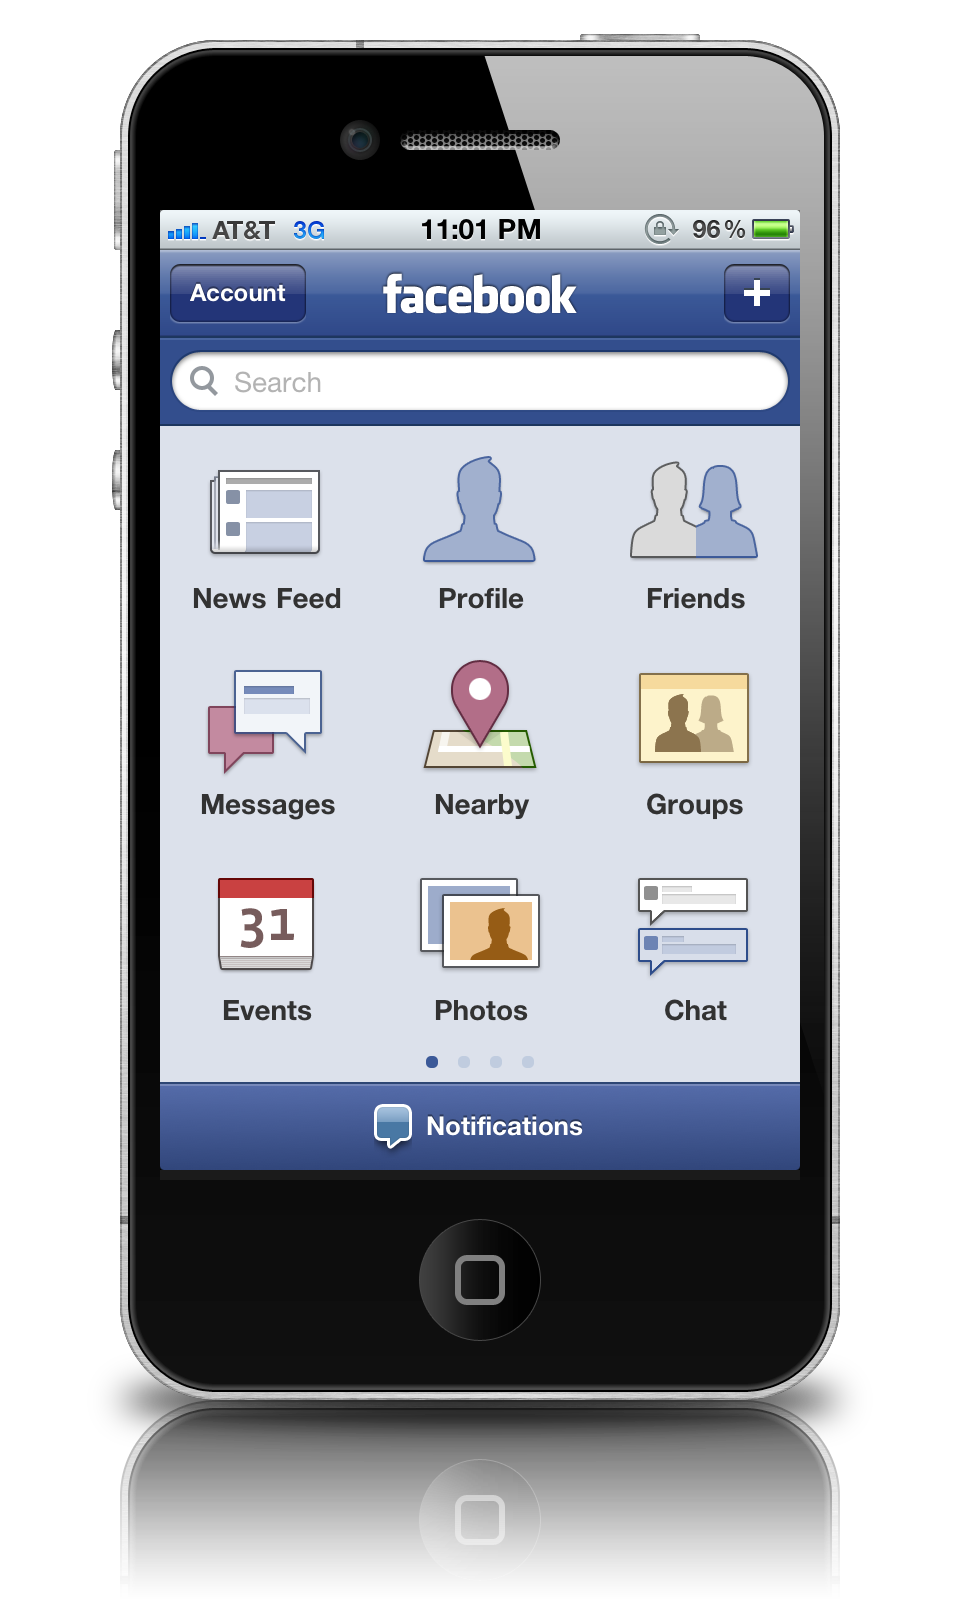 How to find fb id by phone number 2020